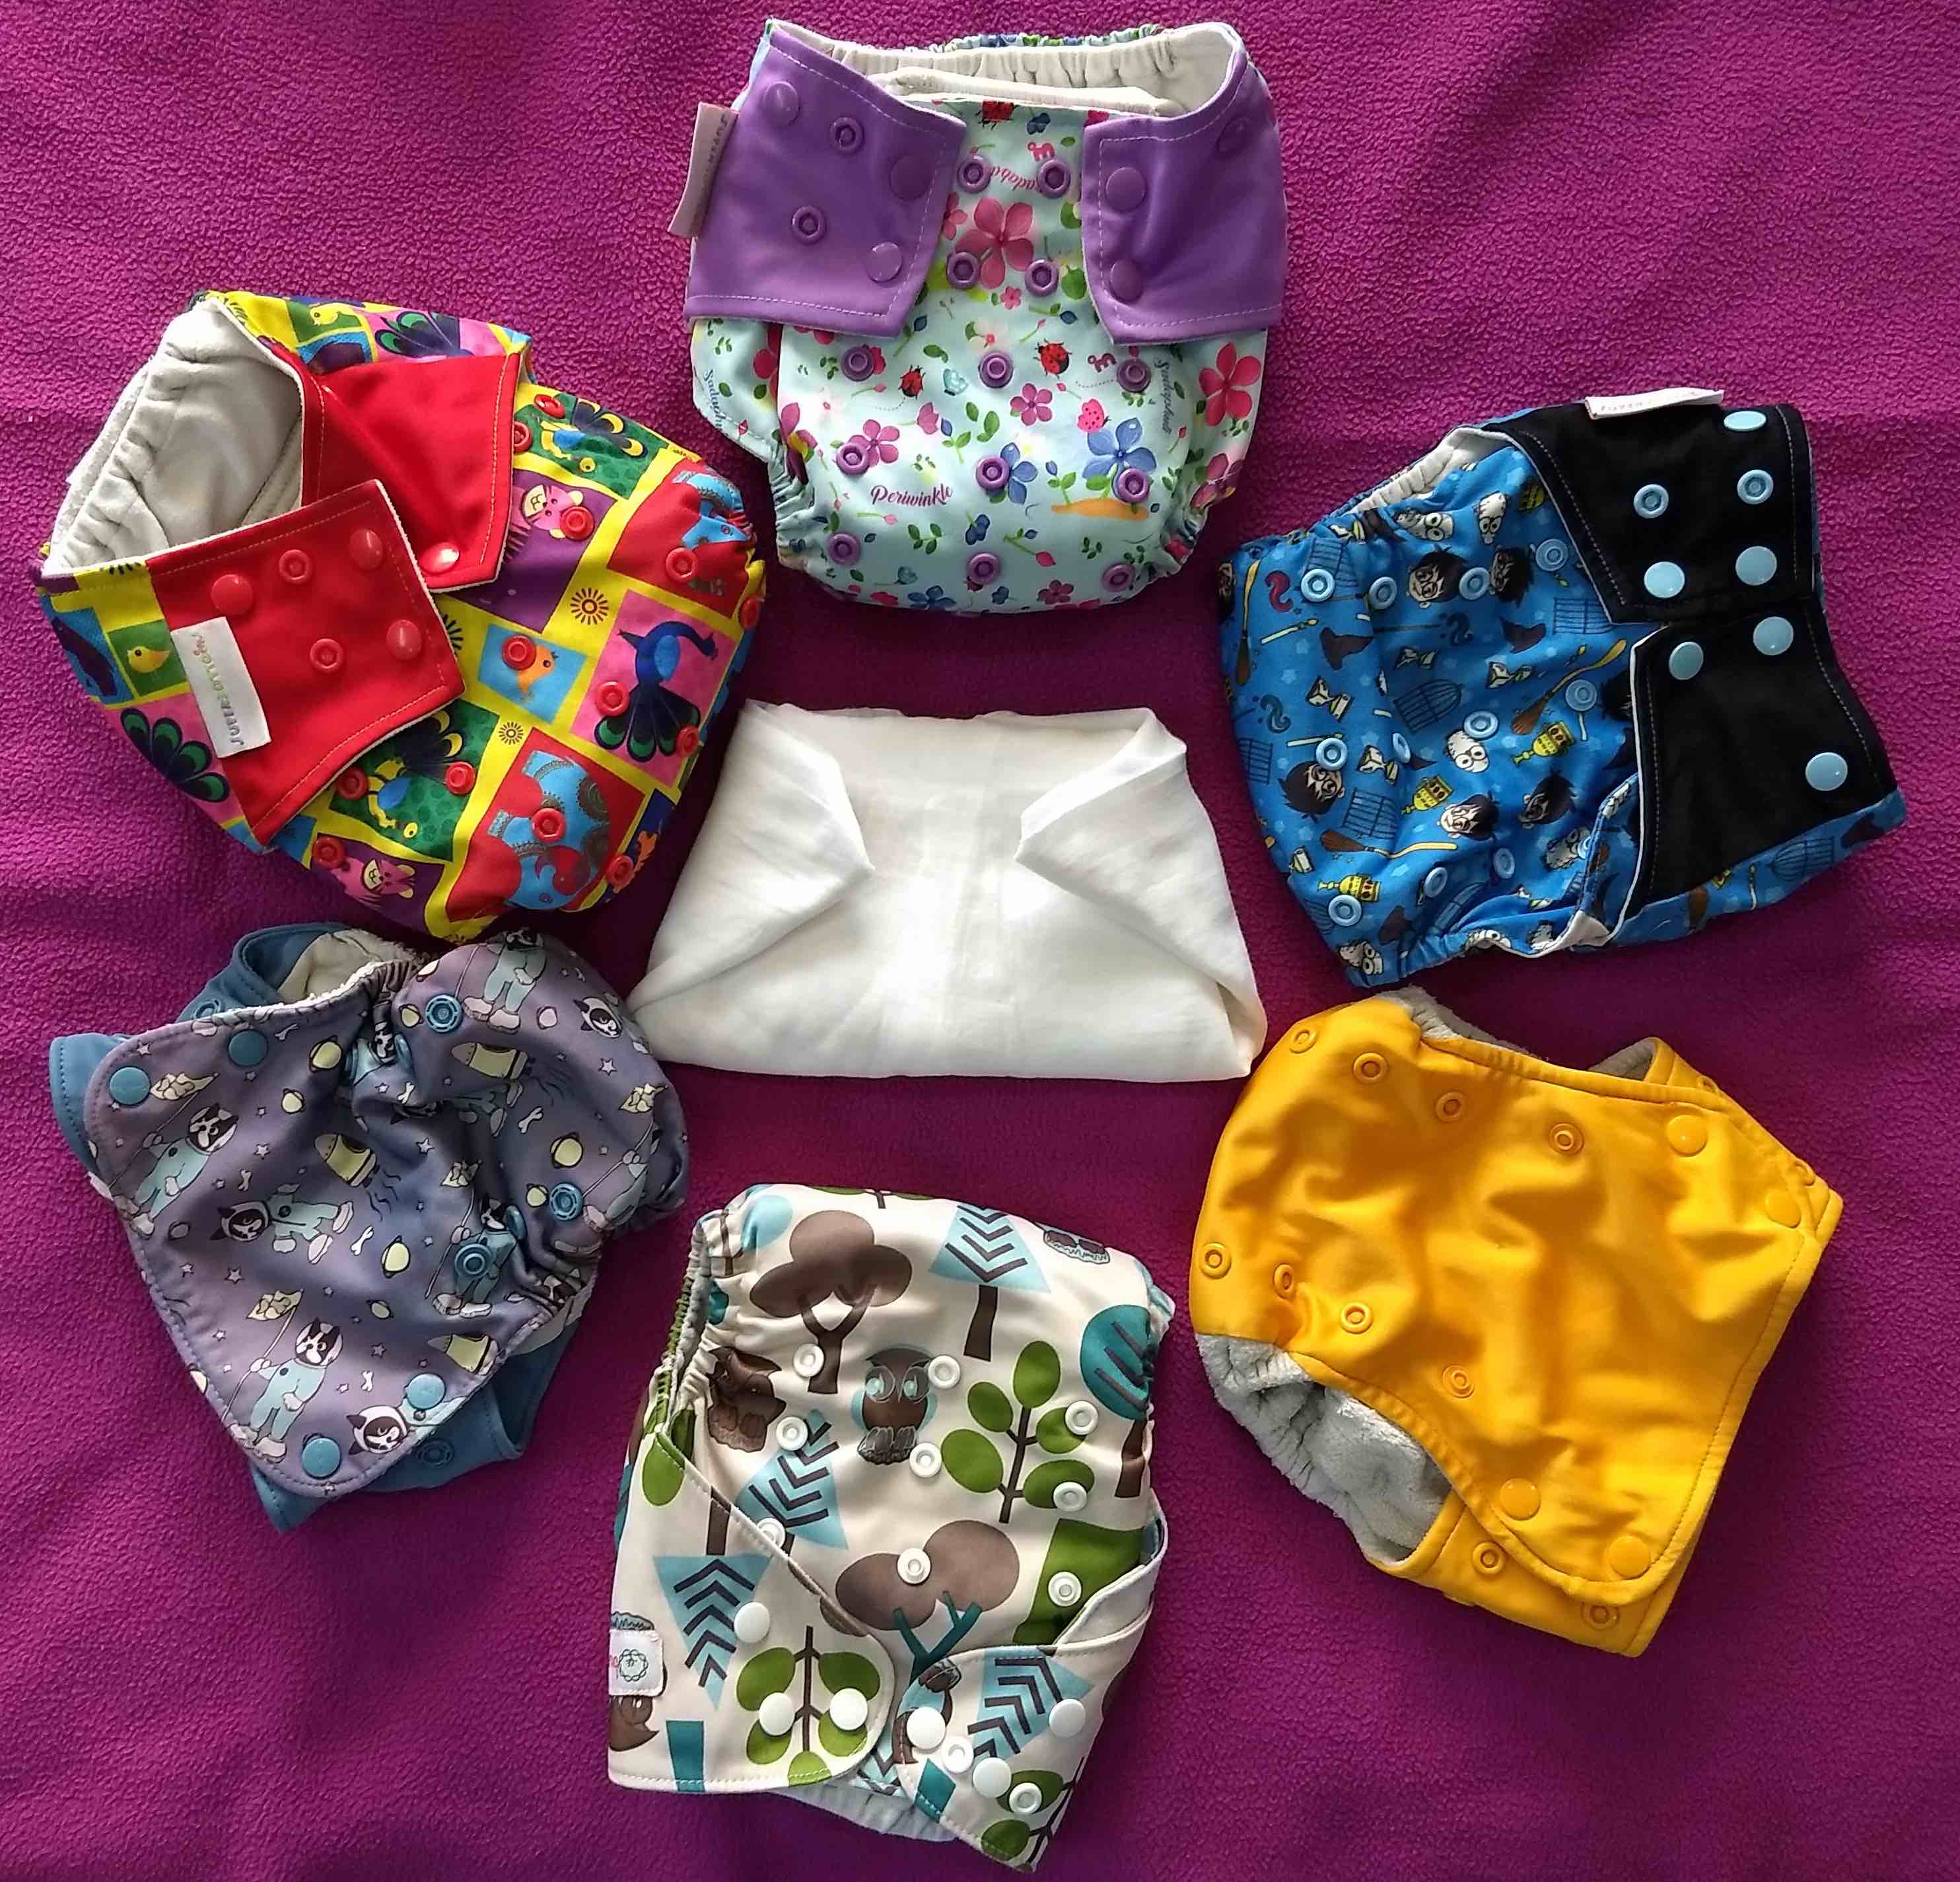 cloth diapers come in different designs and each may serve special purpose